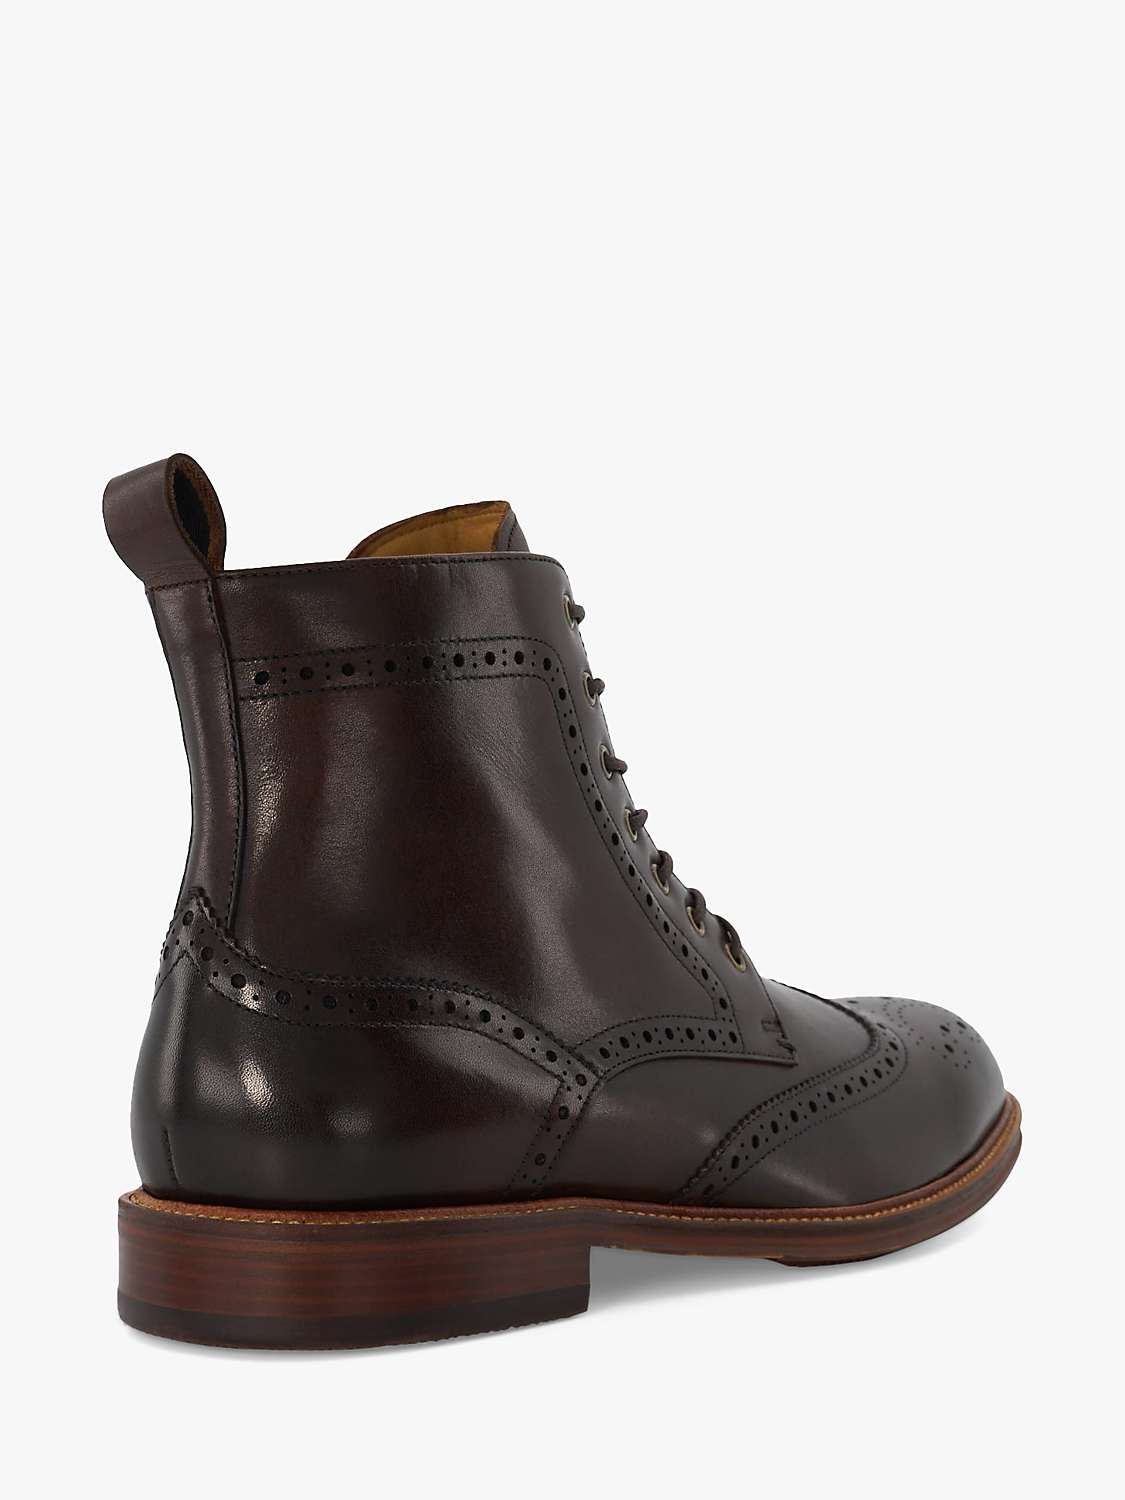 Buy Dune Morrals Lace Up Brogue Boots Online at johnlewis.com